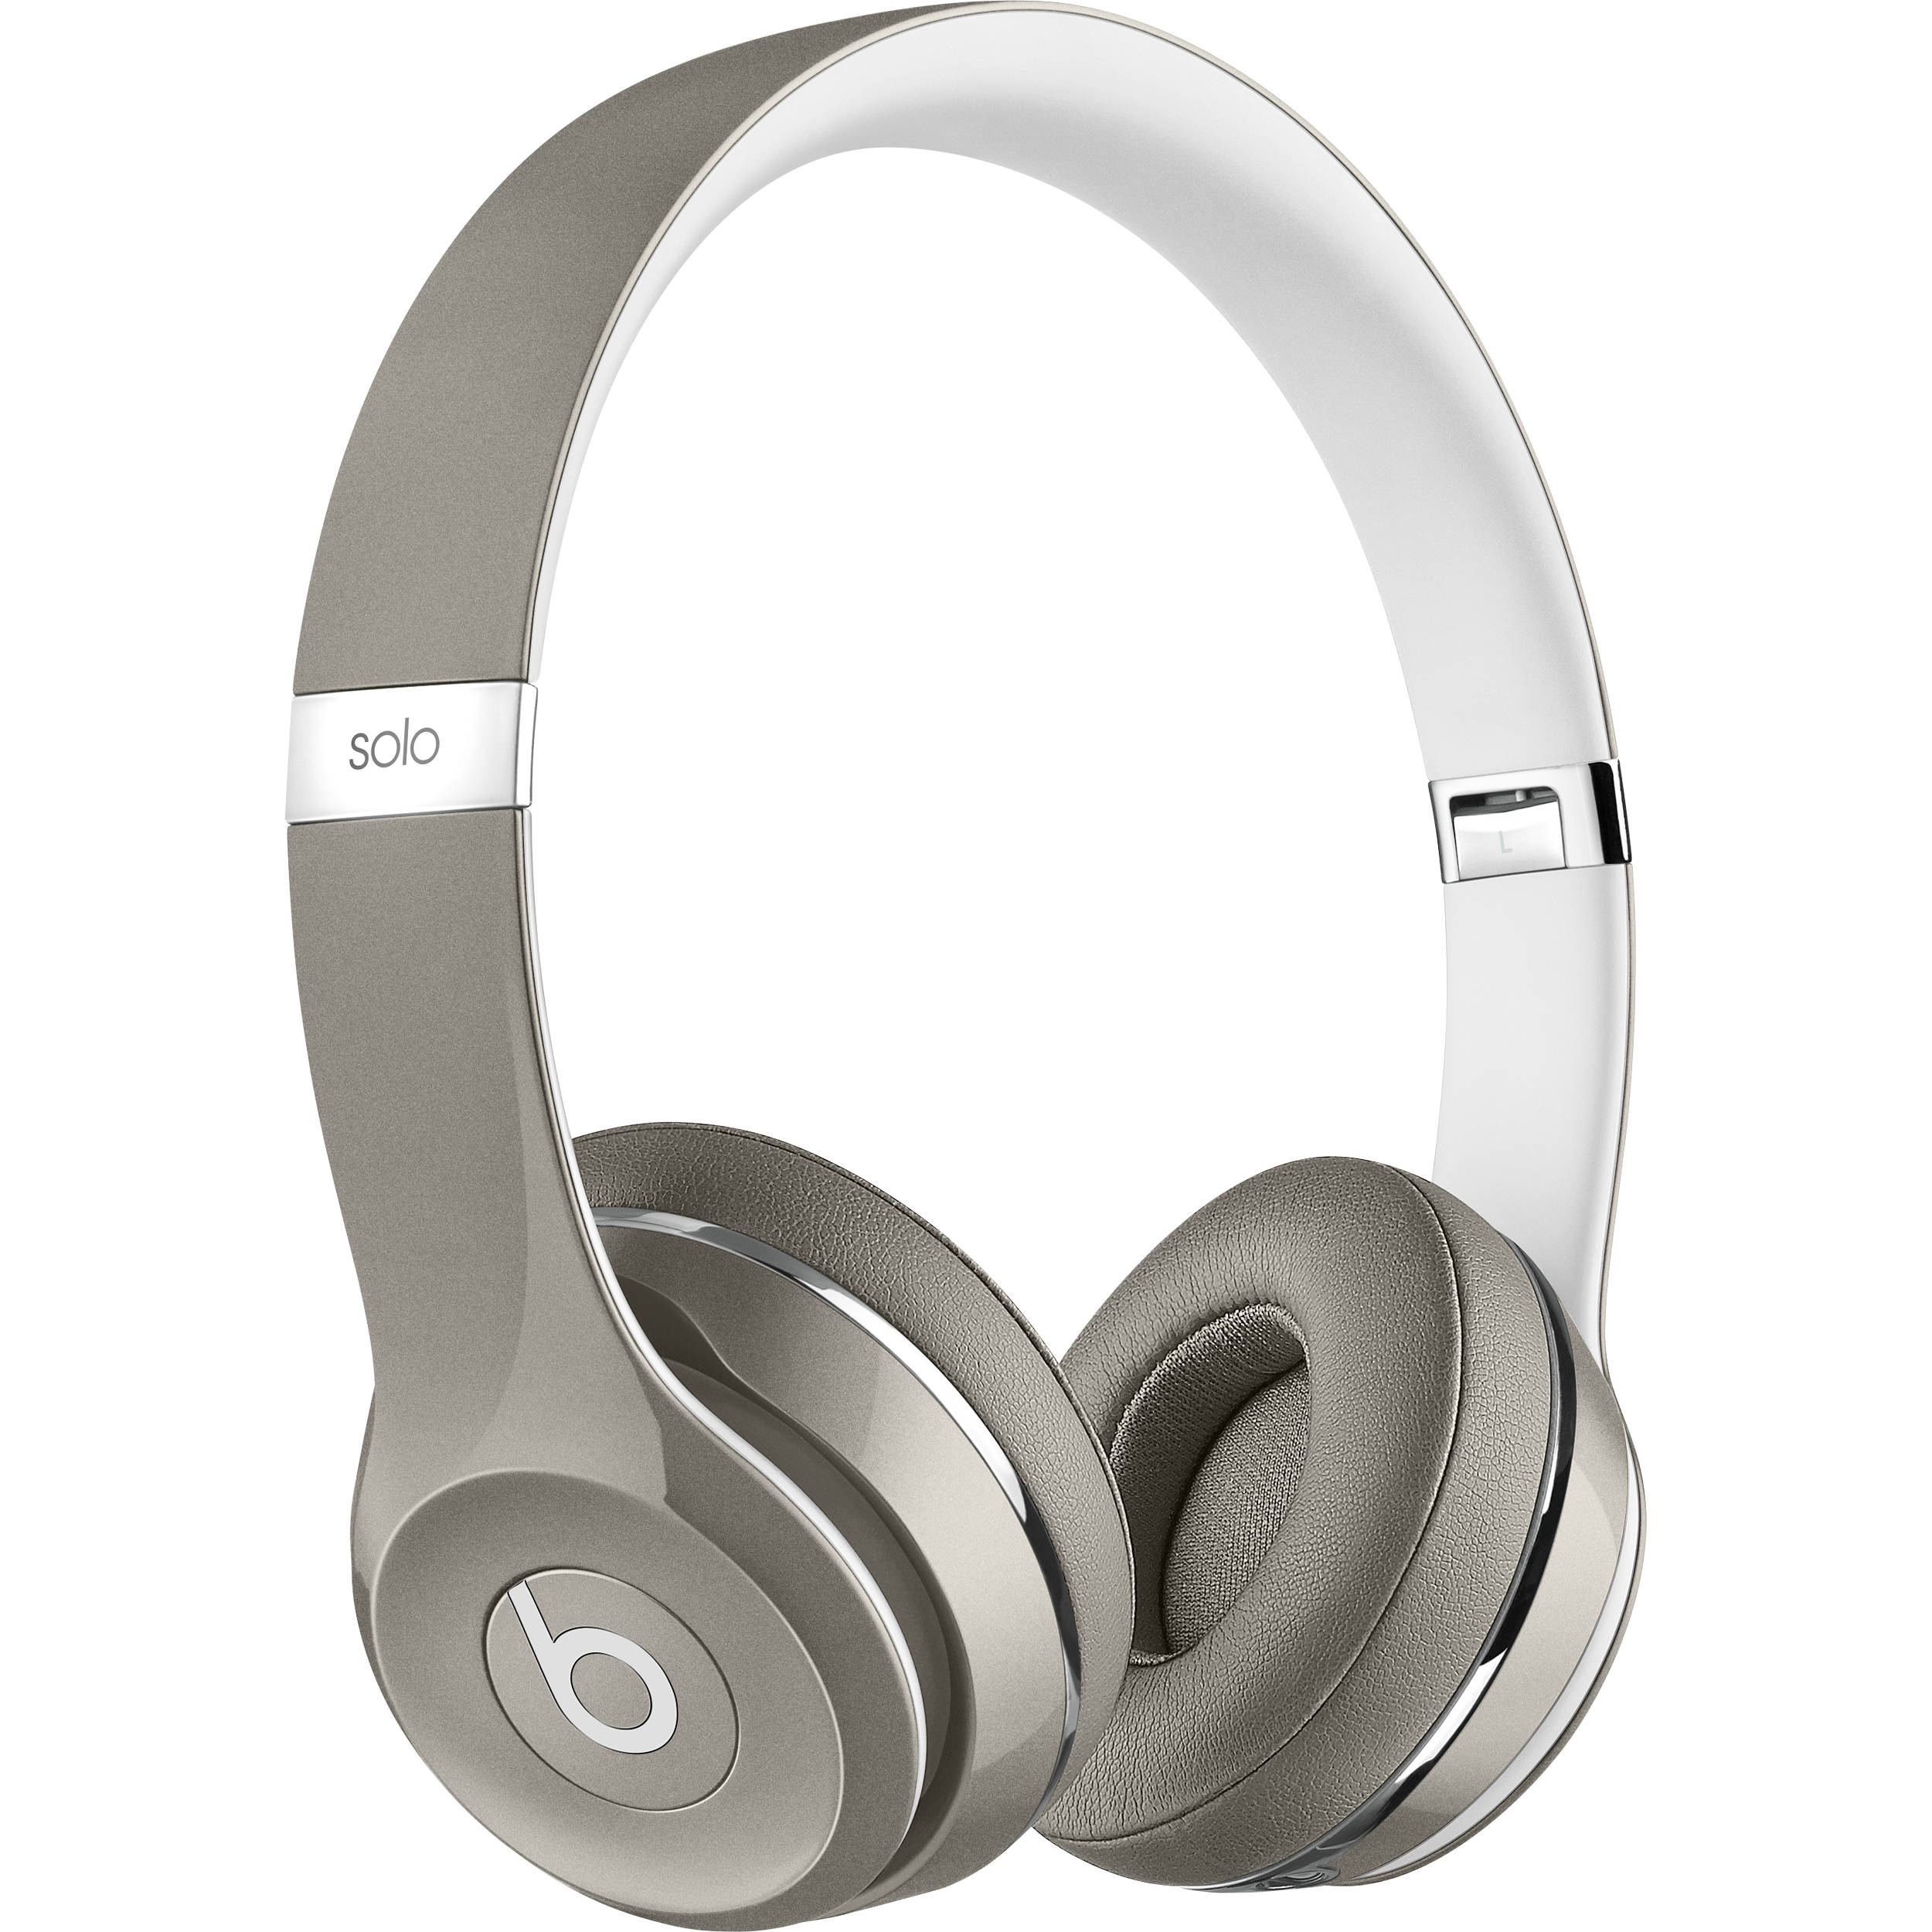 beats solo 2 wireless special edition space gray